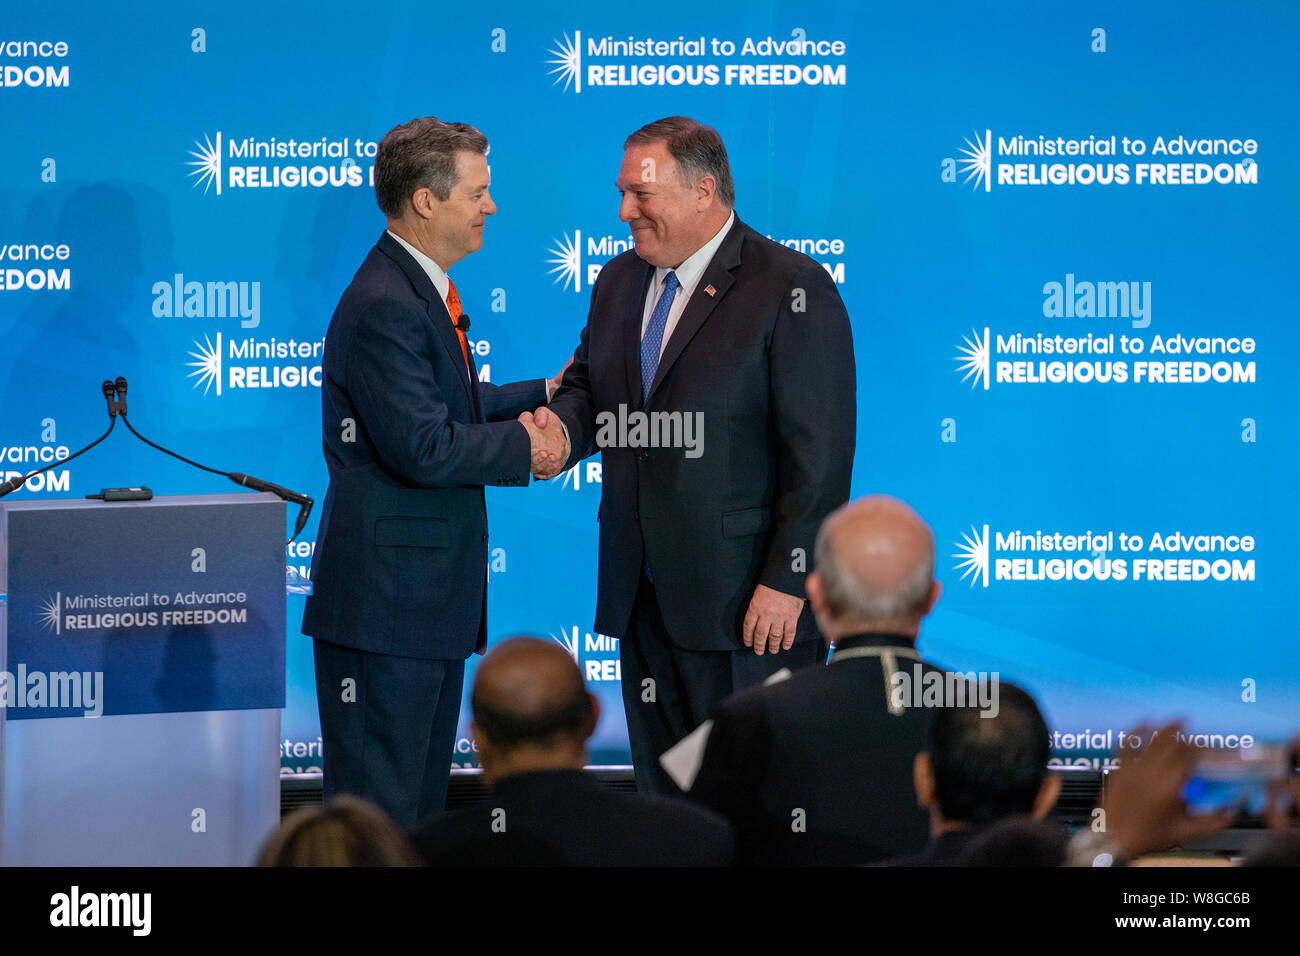 U.S. Secretary of State Michael R. Pompeo is introduced by Ambassador at Large for International Relgious Freedom Sam Brownback at the Ministerial to Stock Photo